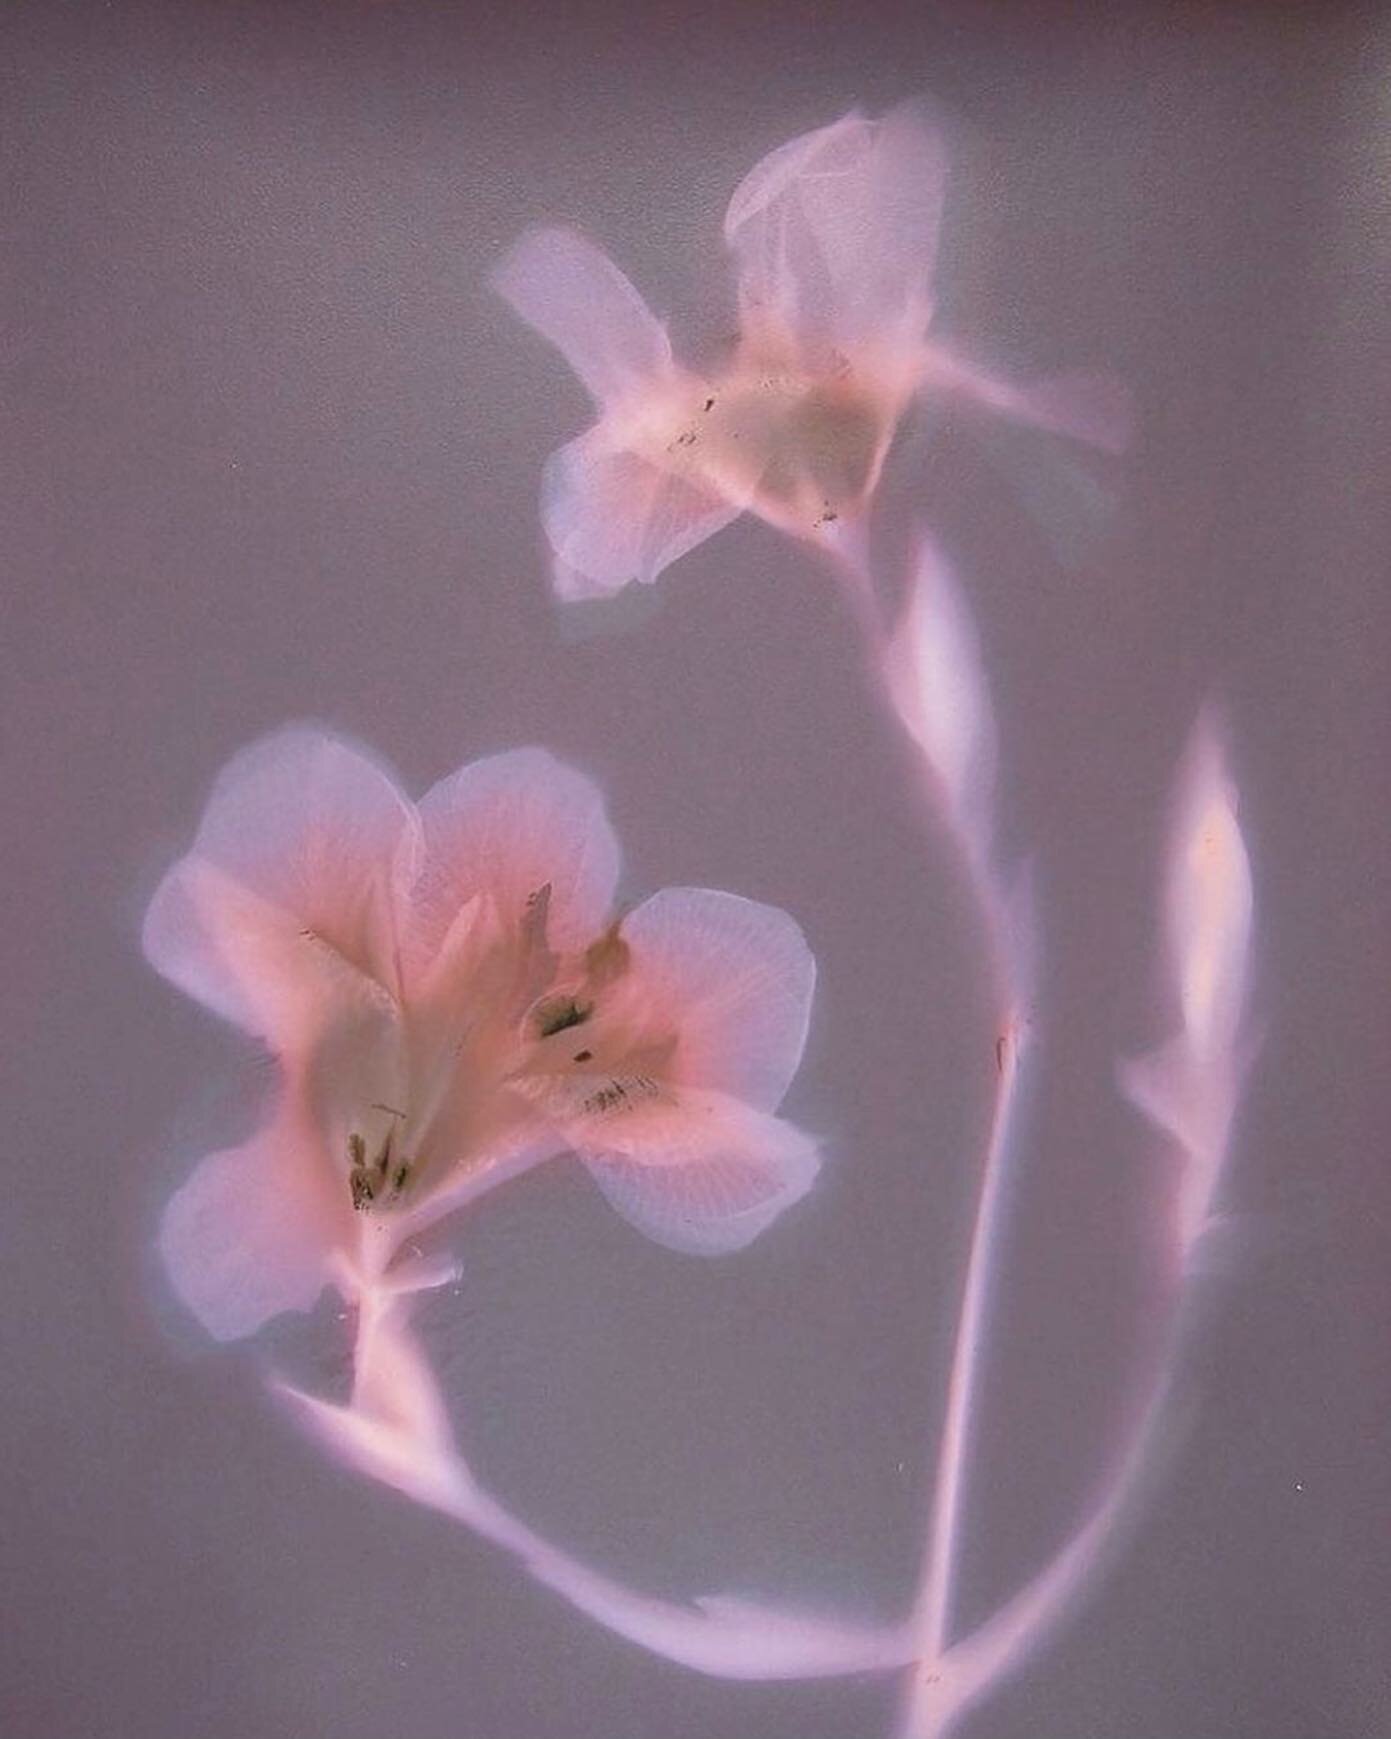 //lumine.scent
.
#photography : #johnforbes 
.
.
.
.
.
.
#escforescent #luminous  #shadow #aura #flower #scent  #bright #future #relics #memory #traces  #perfume #multisensory #impermanence #permanence #moment #memrory #time #space #nature #vibration